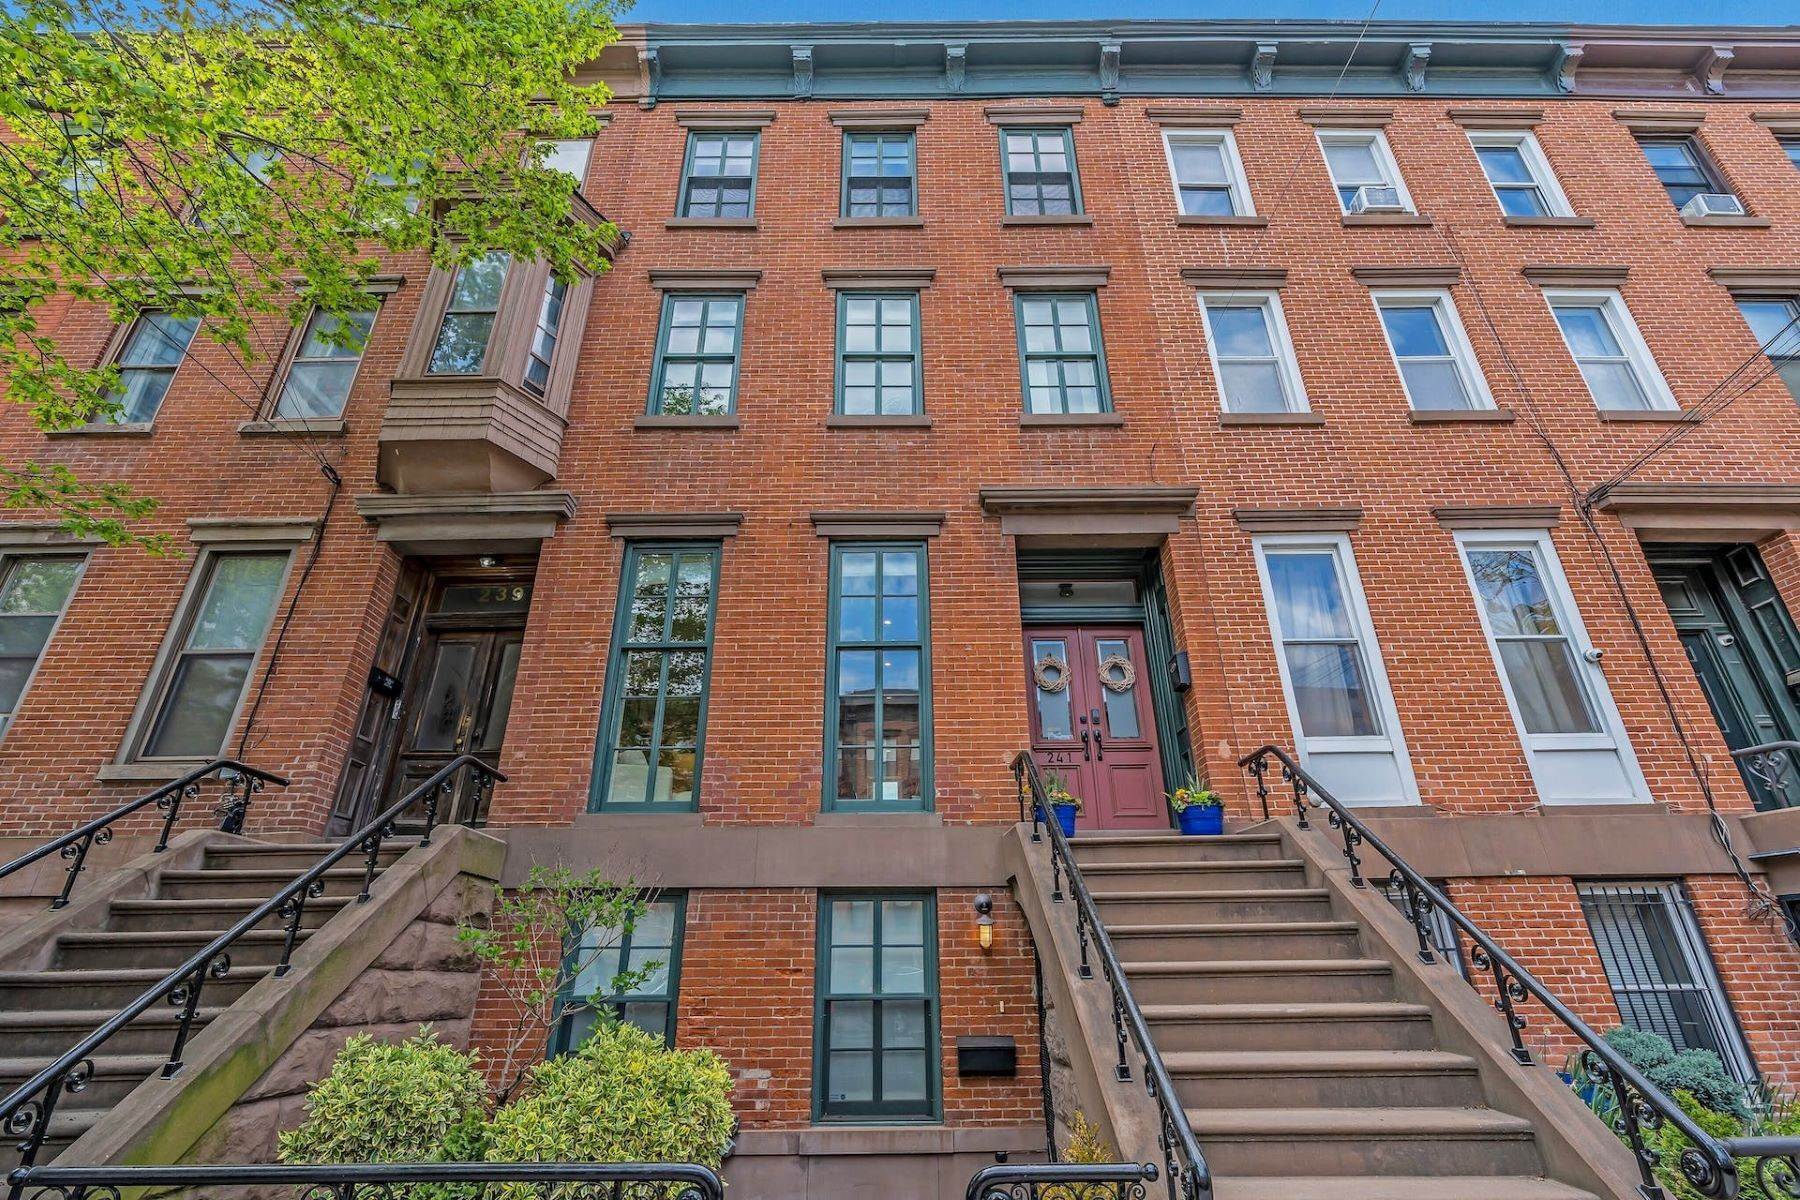 Single Family Homes for Sale at Downtown Grove St Brownstone 241 Grove St Jersey City, New Jersey 07302 United States